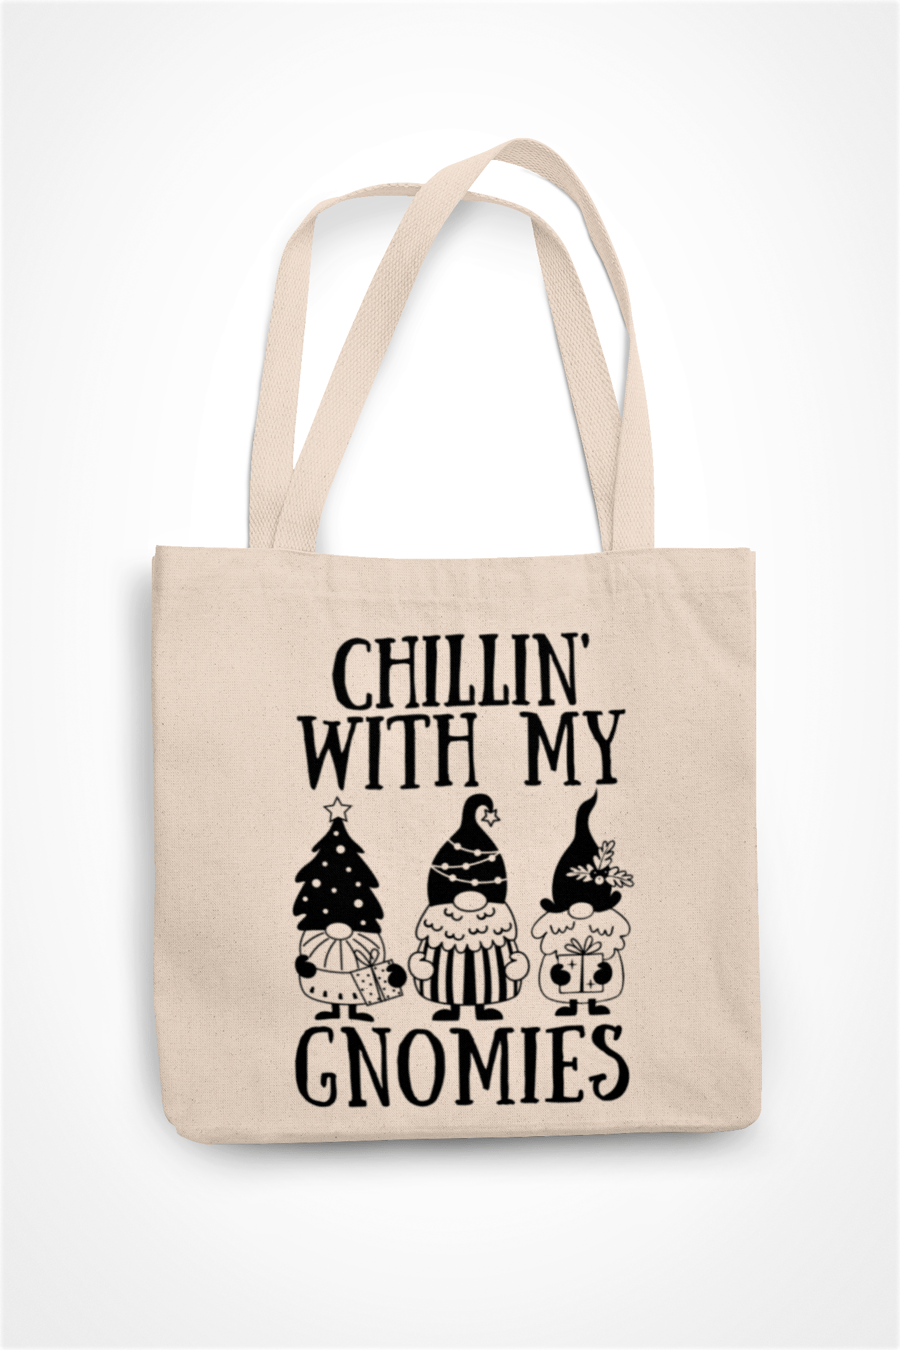 Chillin With My GNOMIES  - Novelty Funny Christmas Tote Bag 